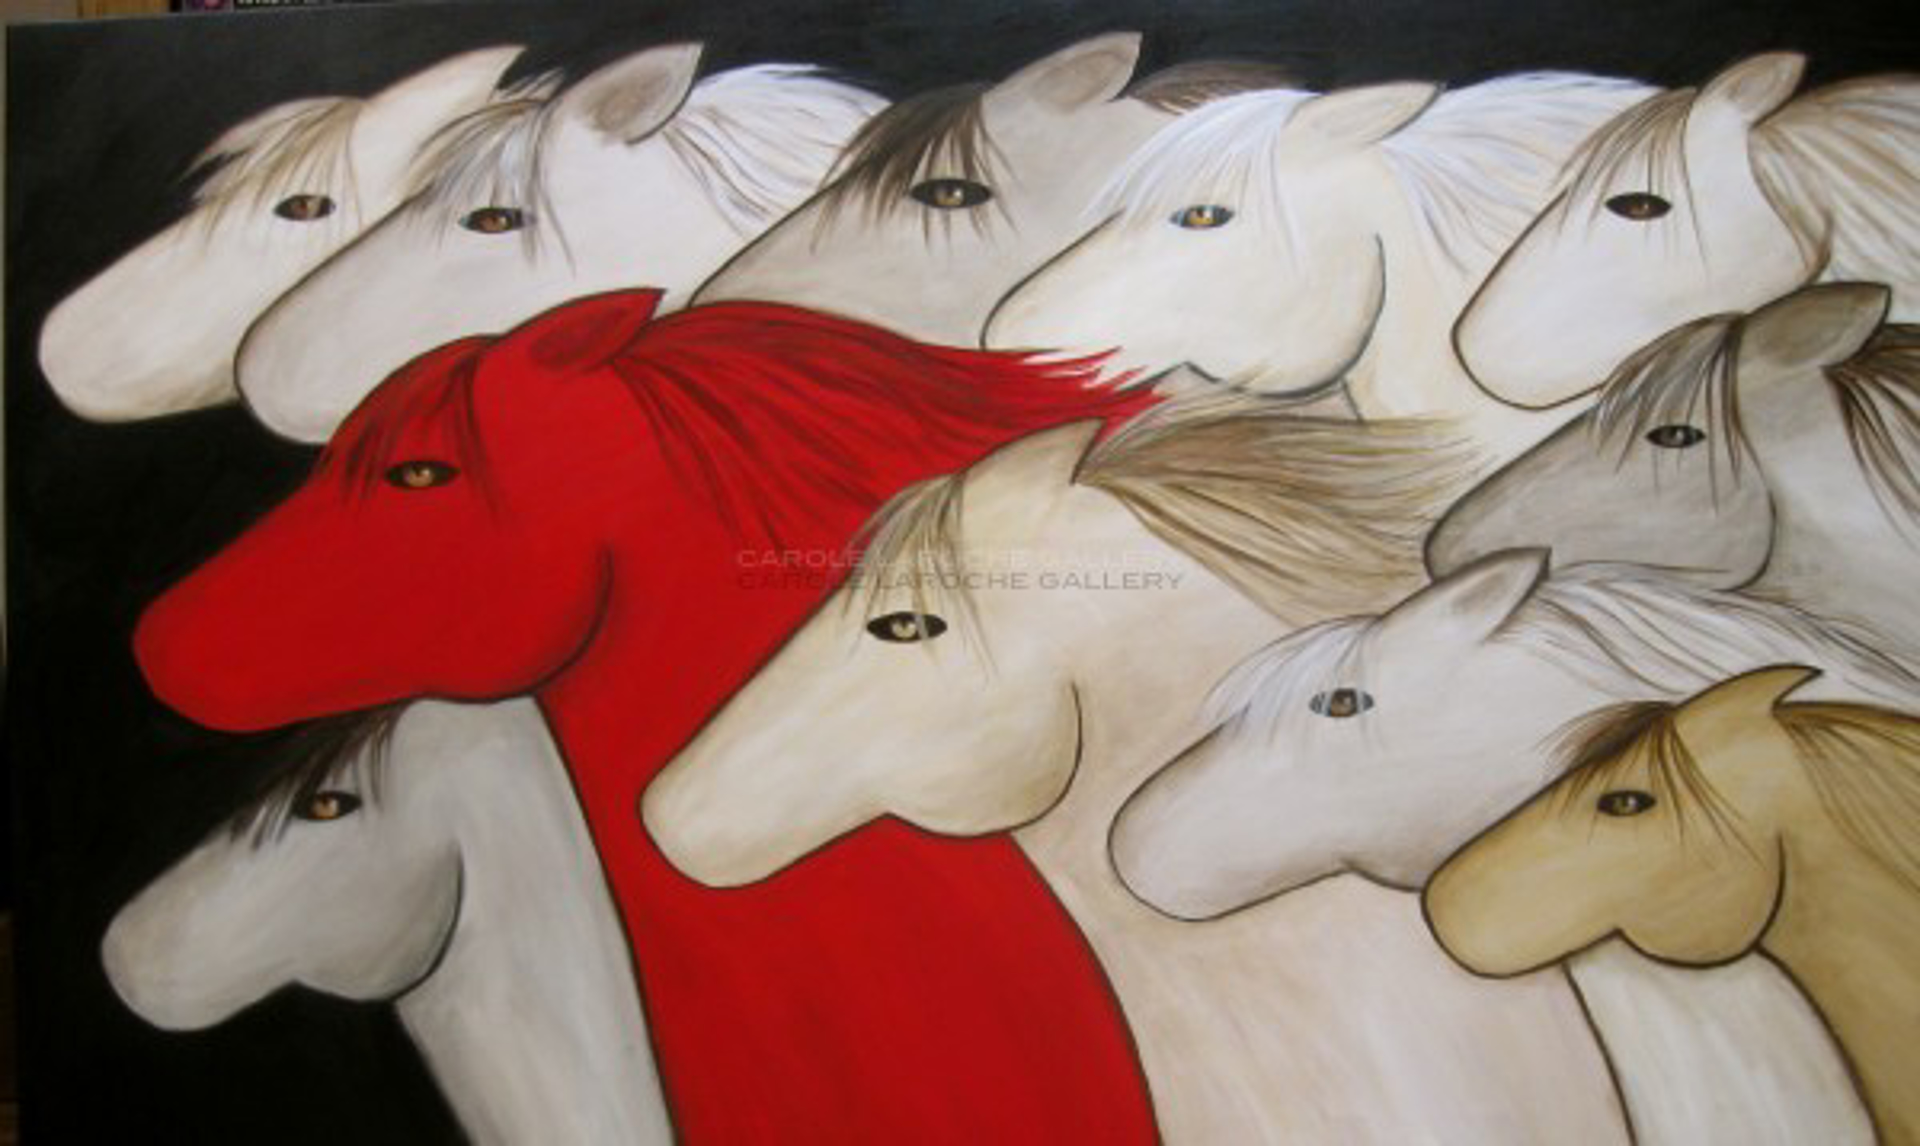 RED PONY - limited edition giclee on canvas: (large) 40"x65" $3700 or (medium) 24"x40" $2400 by Carole LaRoche